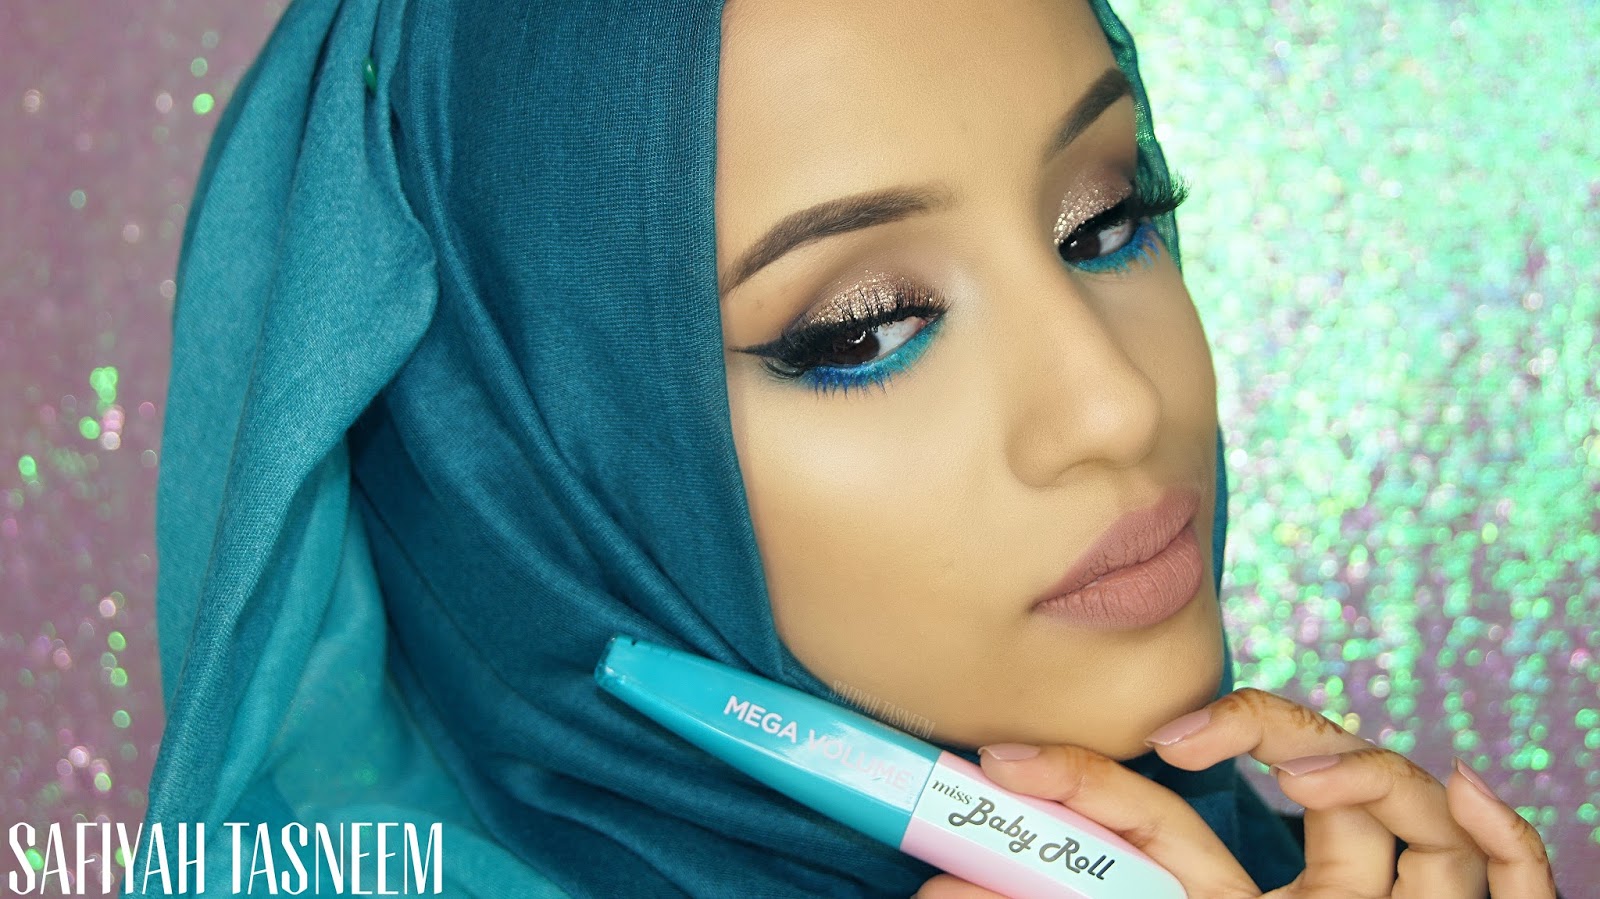 whisky vedtage pumpe SAFIYAH TASNEEM : Friday FOTD: Mermaid Lashes Makeup Look - L'Oreal Miss  Baby Roll